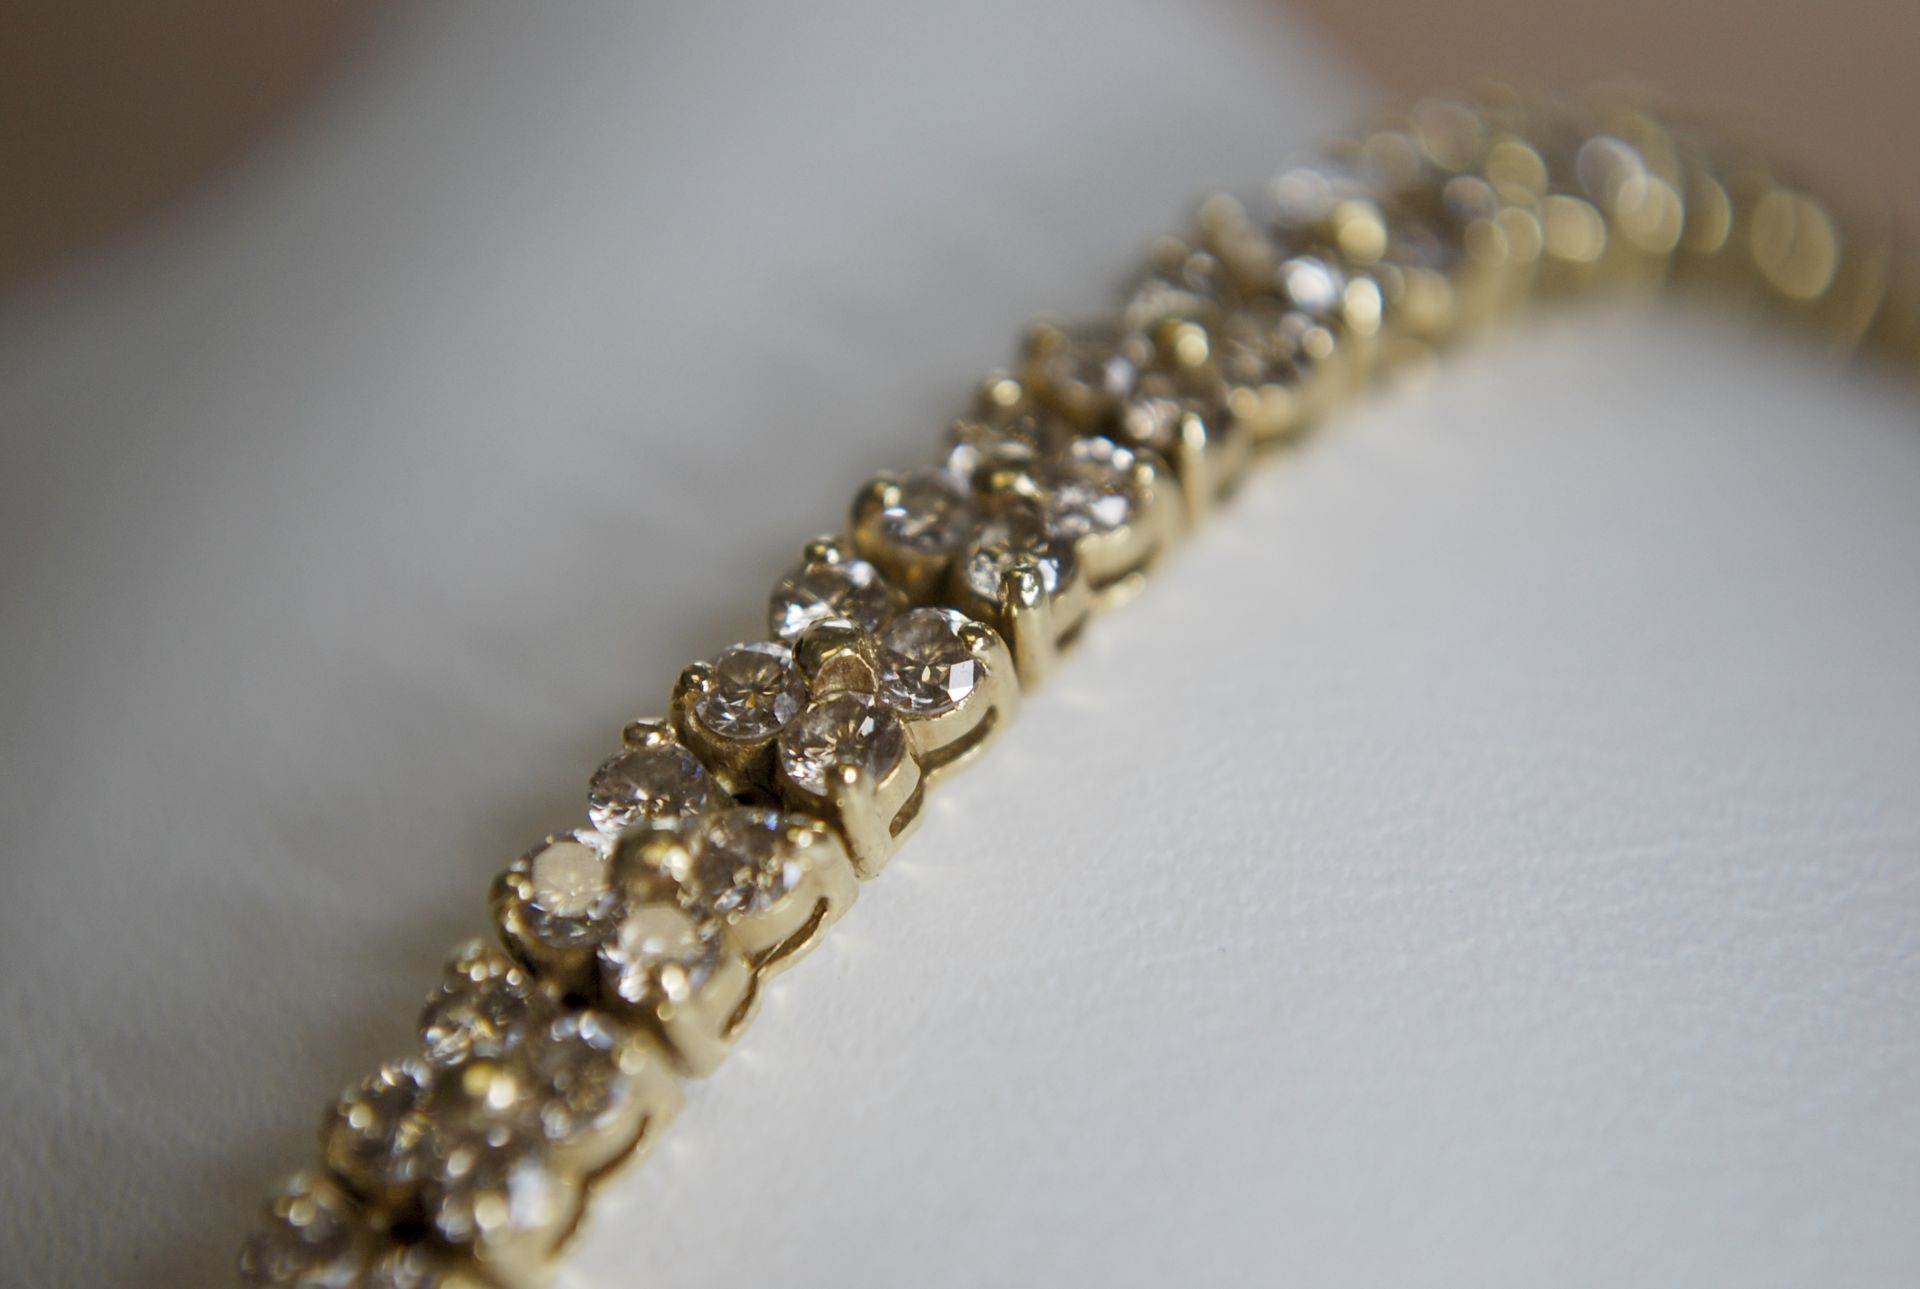 18ct GOLD 5.00ct DIAMOND TENNIS BRACELET WITH £8000 VALUATION - Image 2 of 5